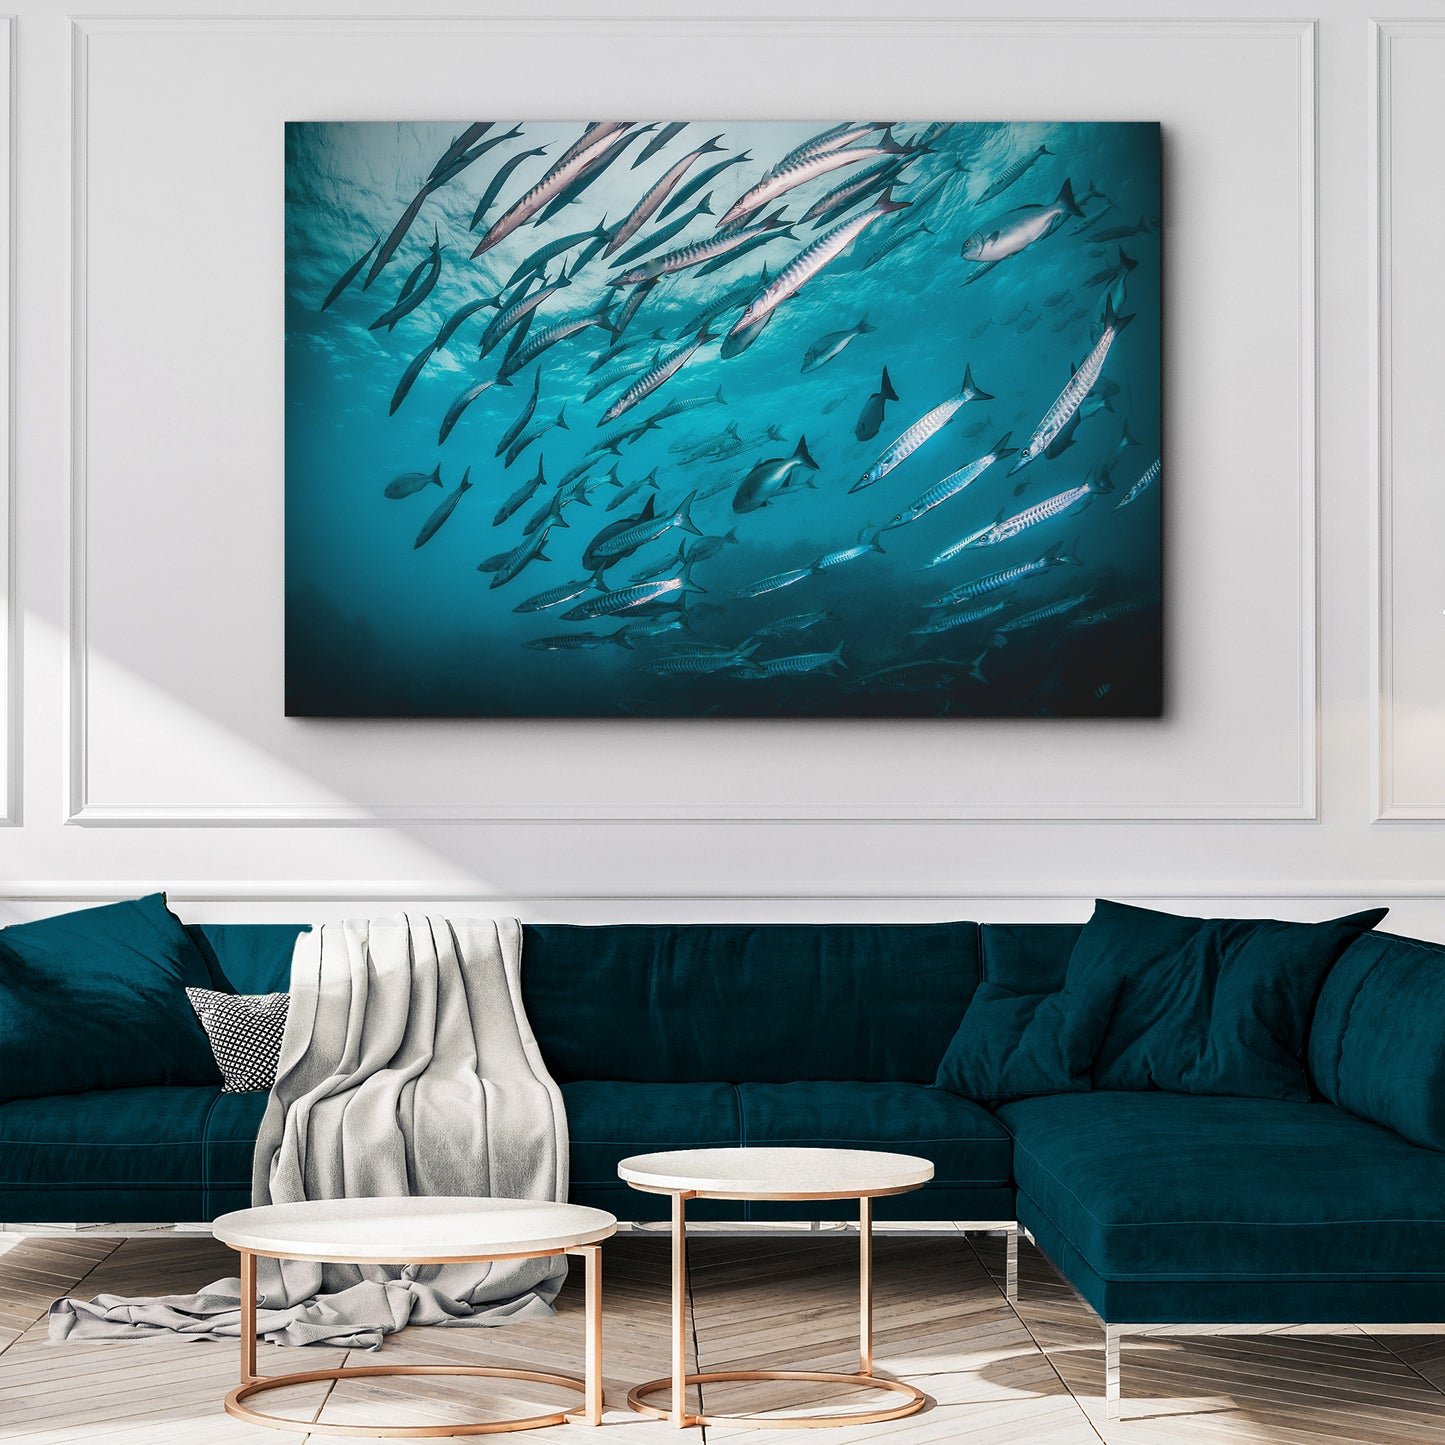 Vibrant Ocean Fish Wall Art - Image by Tailored Canvases